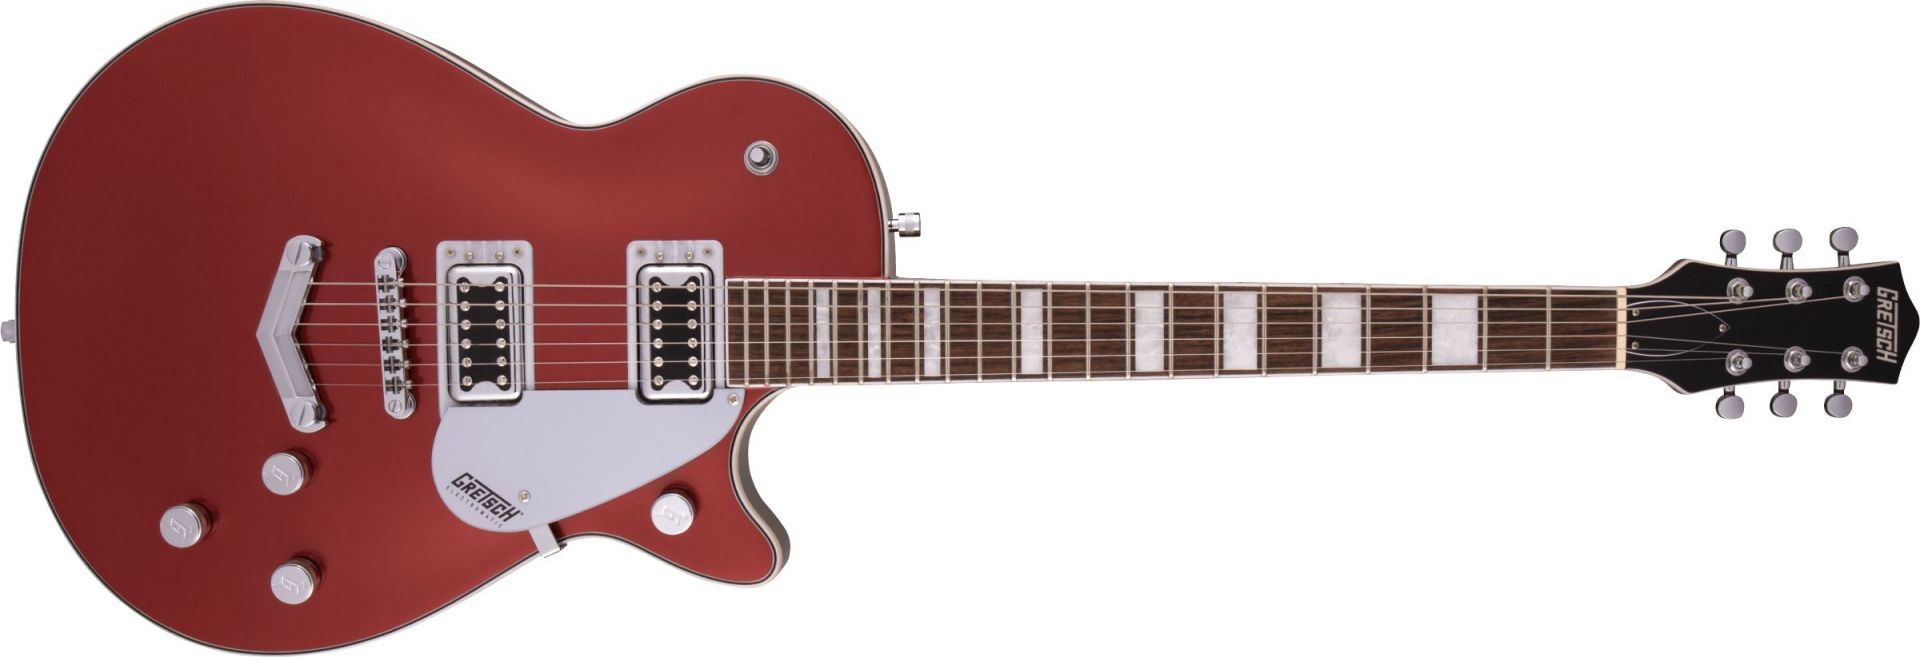 Gretsch Guitars G5220 Electromatic Jet BT Single-Cut with V-Stoptail Firestick Red